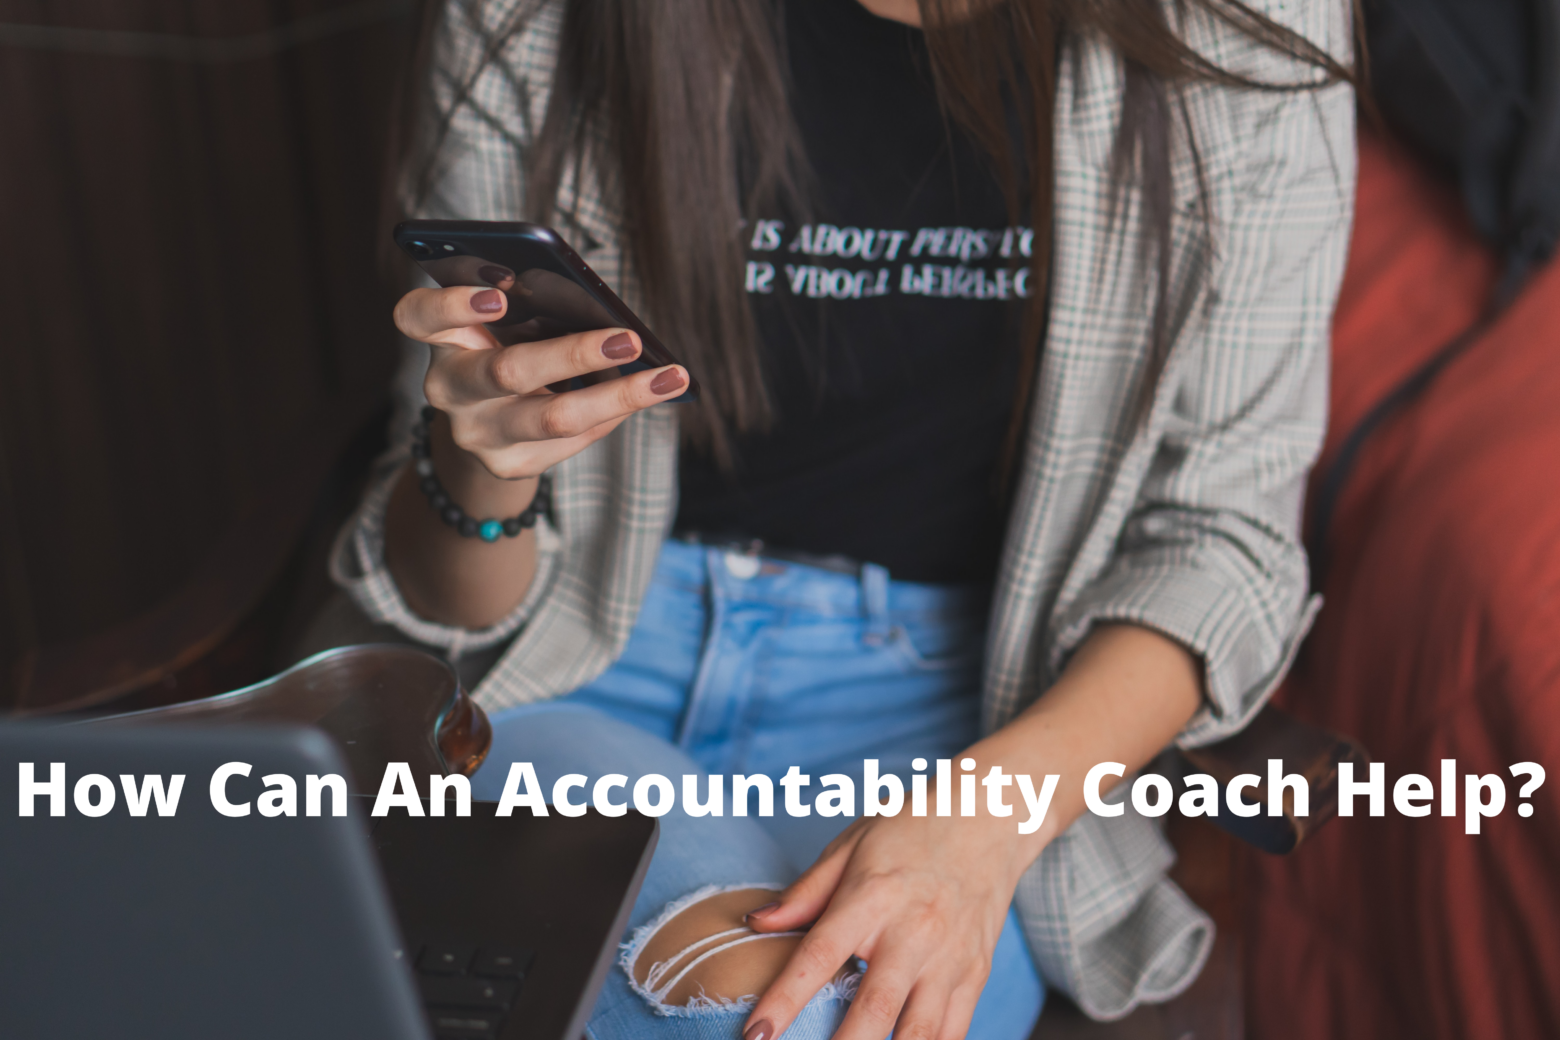 What Could You Use An Accountability Coach To Help You With?